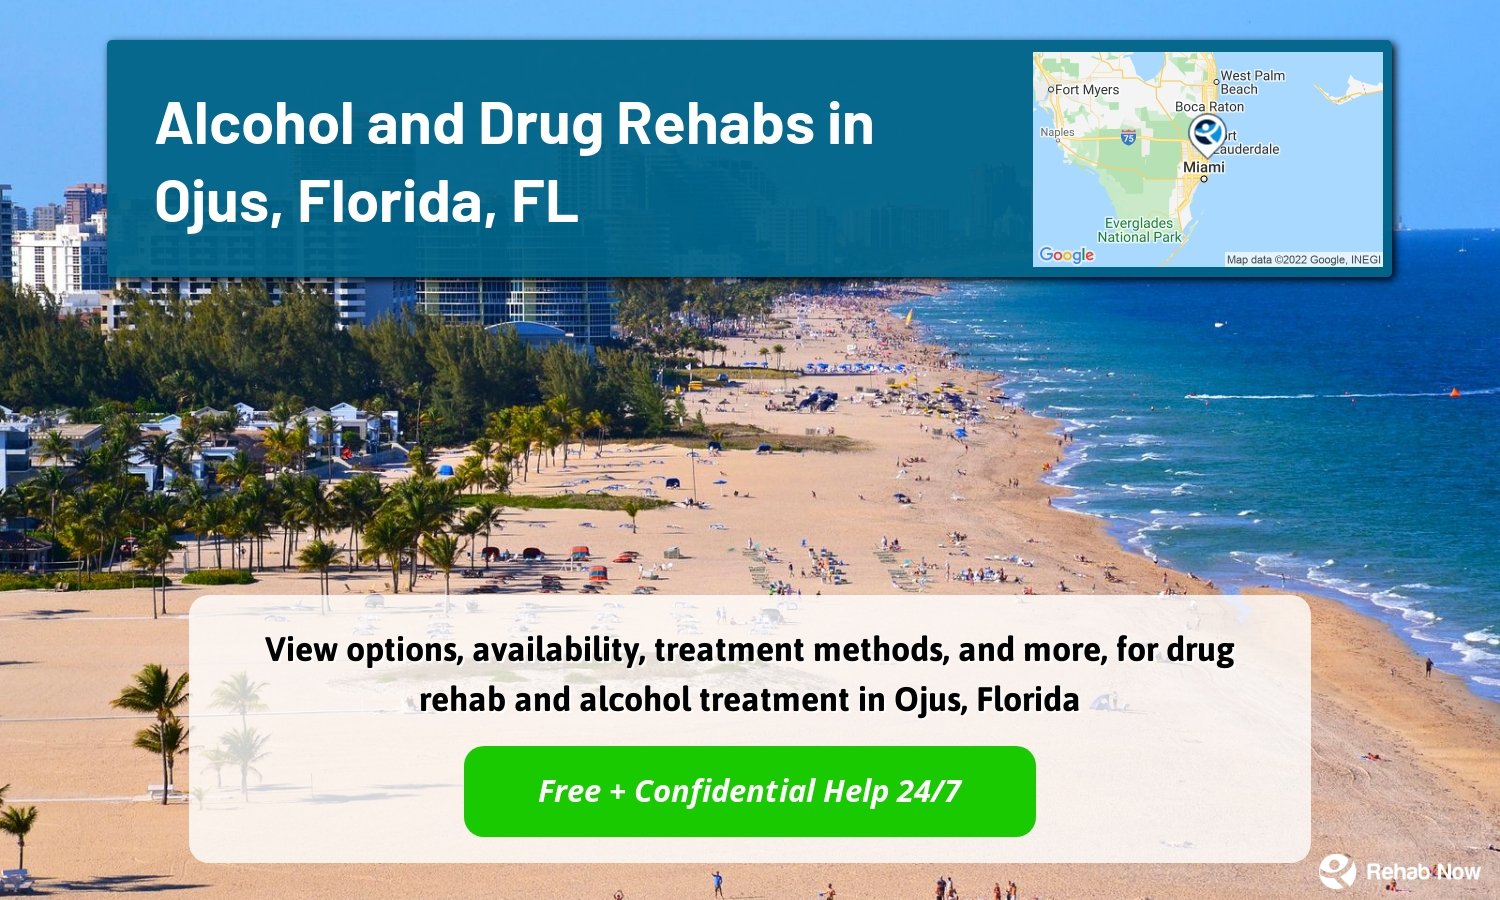 View options, availability, treatment methods, and more, for drug rehab and alcohol treatment in Ojus, Florida